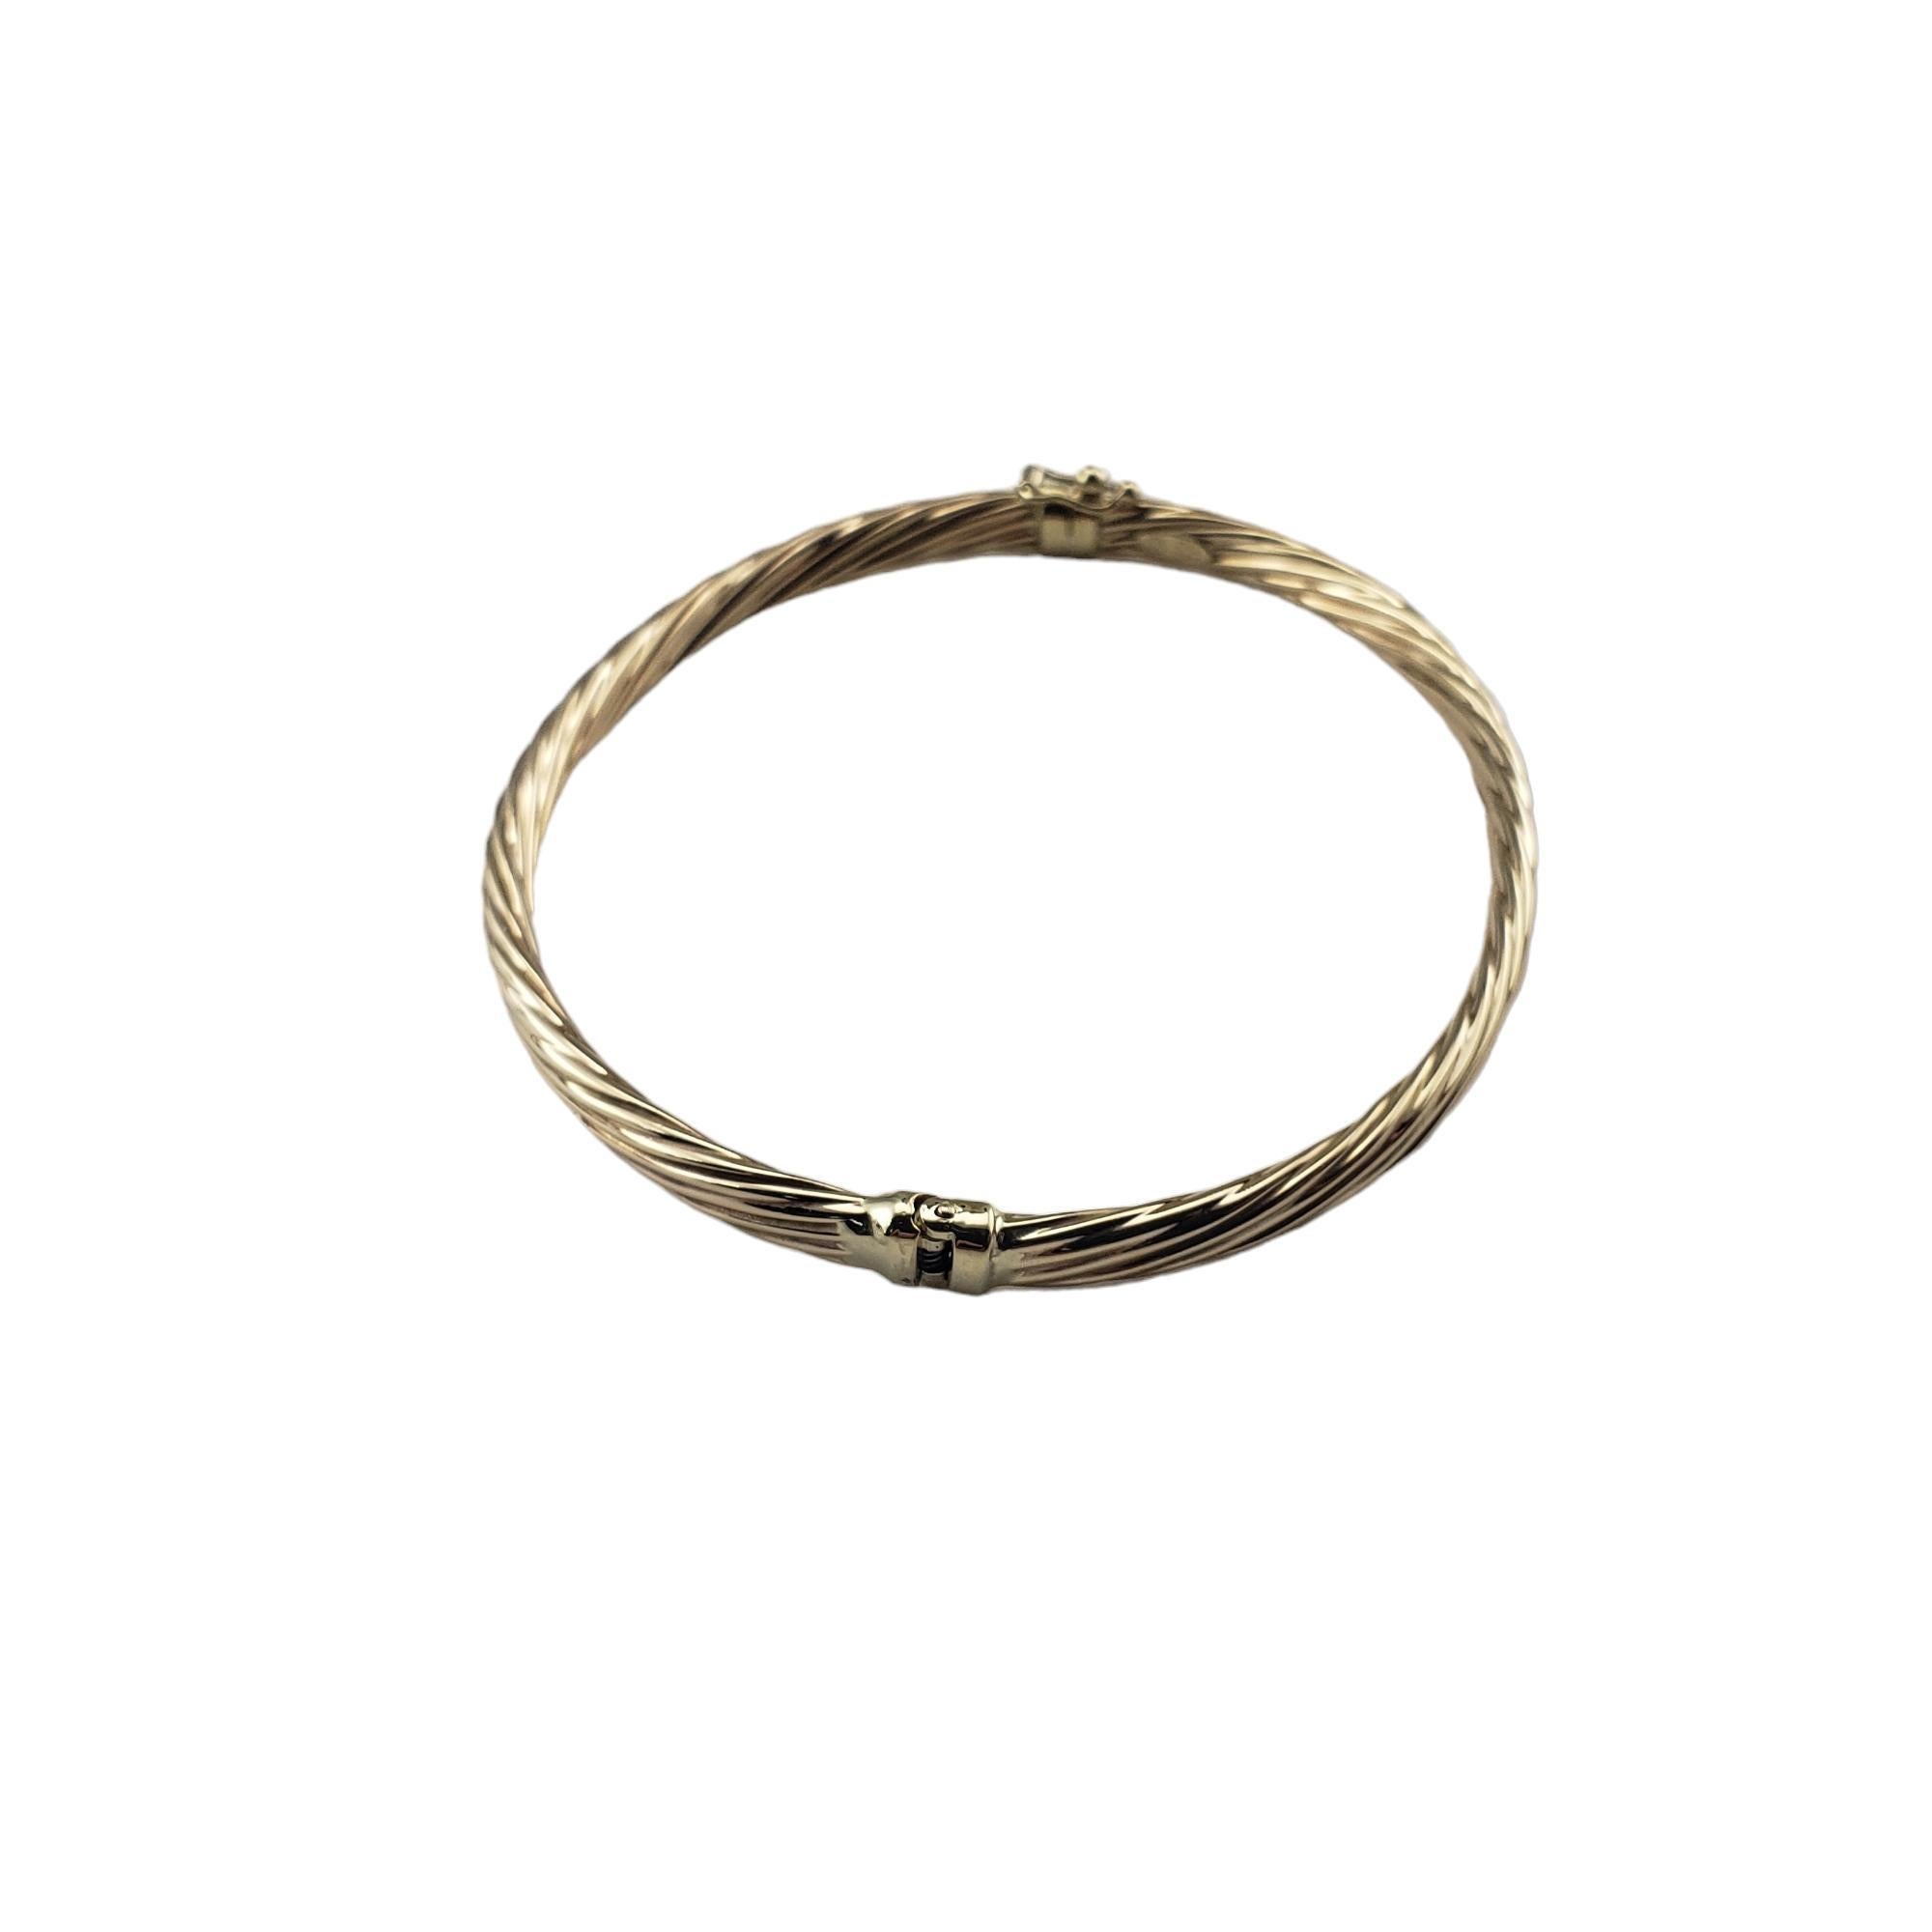 Vintage 14K Yellow Gold Oval Bangle Bracelet-

This elegant hinged bangle bracelet is crafted in beautifully detailed 14K yellow gold.  Width: 4 mm.

Size: 7 inches

Stamped: 14K Italy

Weight: 4.9 gr./ 3.1 dwt.

Very good condition, professionally